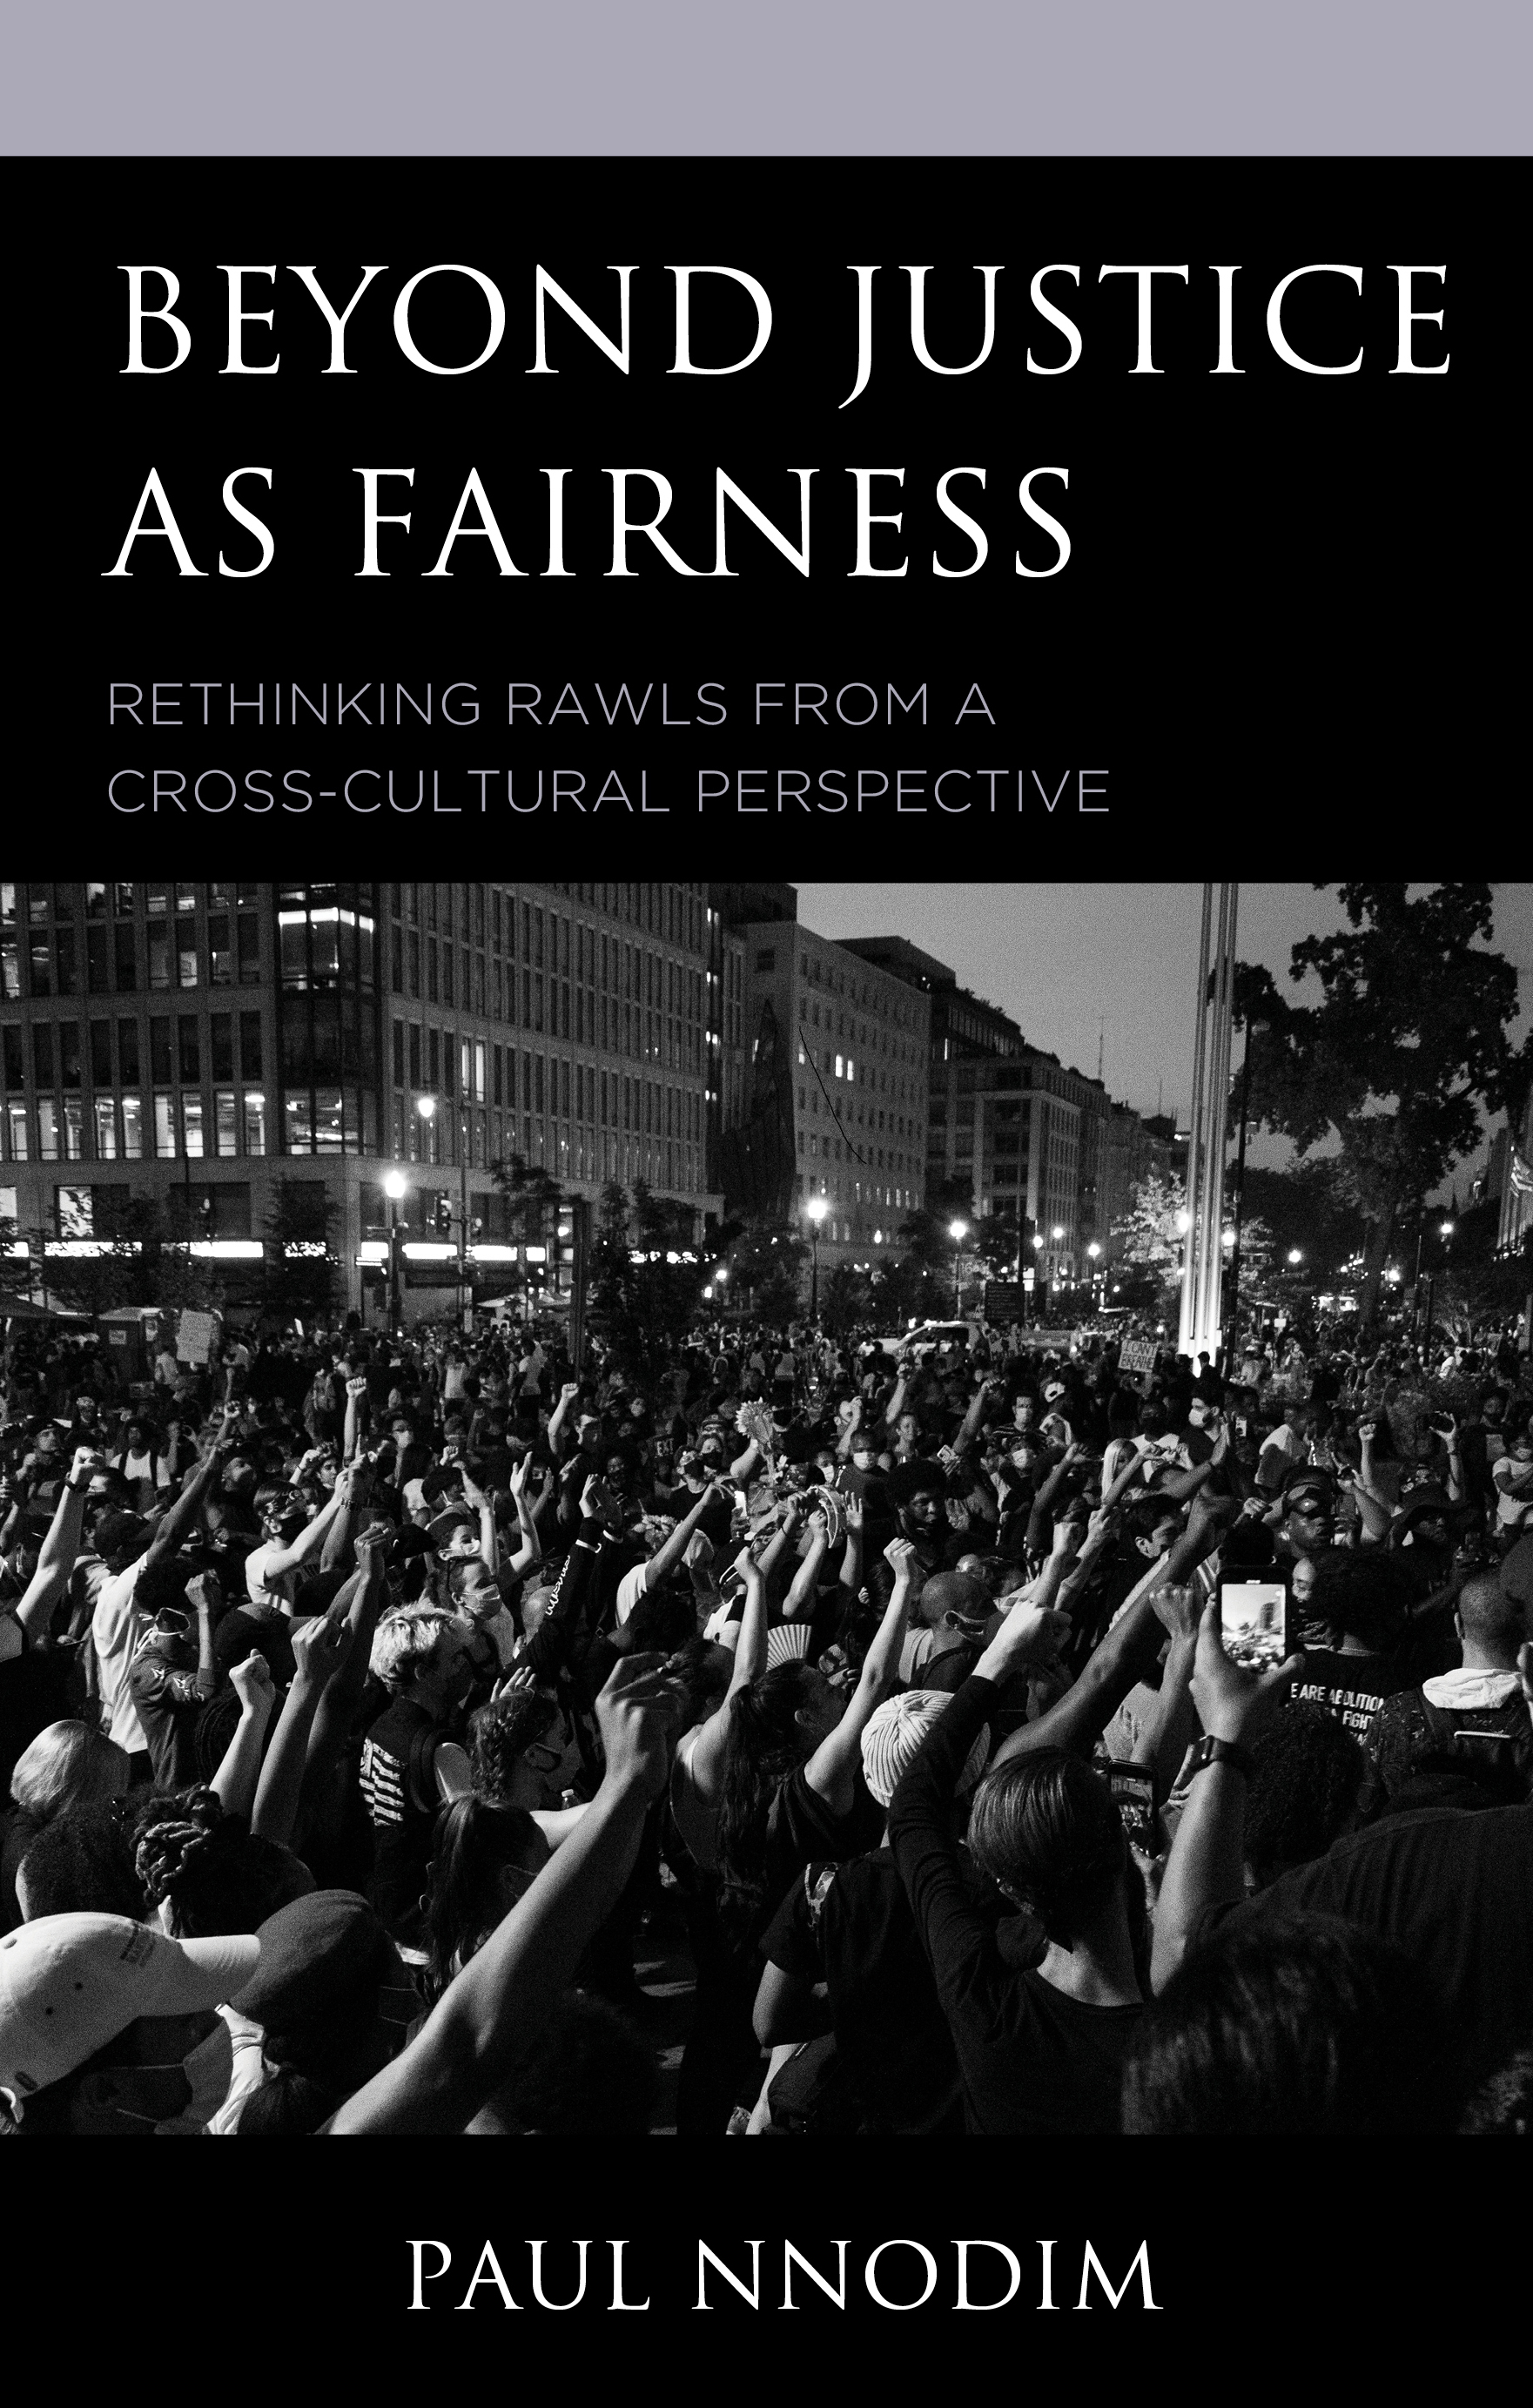 Beyond Justice as Fairness: Rethinking Rawls from a Cross-Cultural Perspective